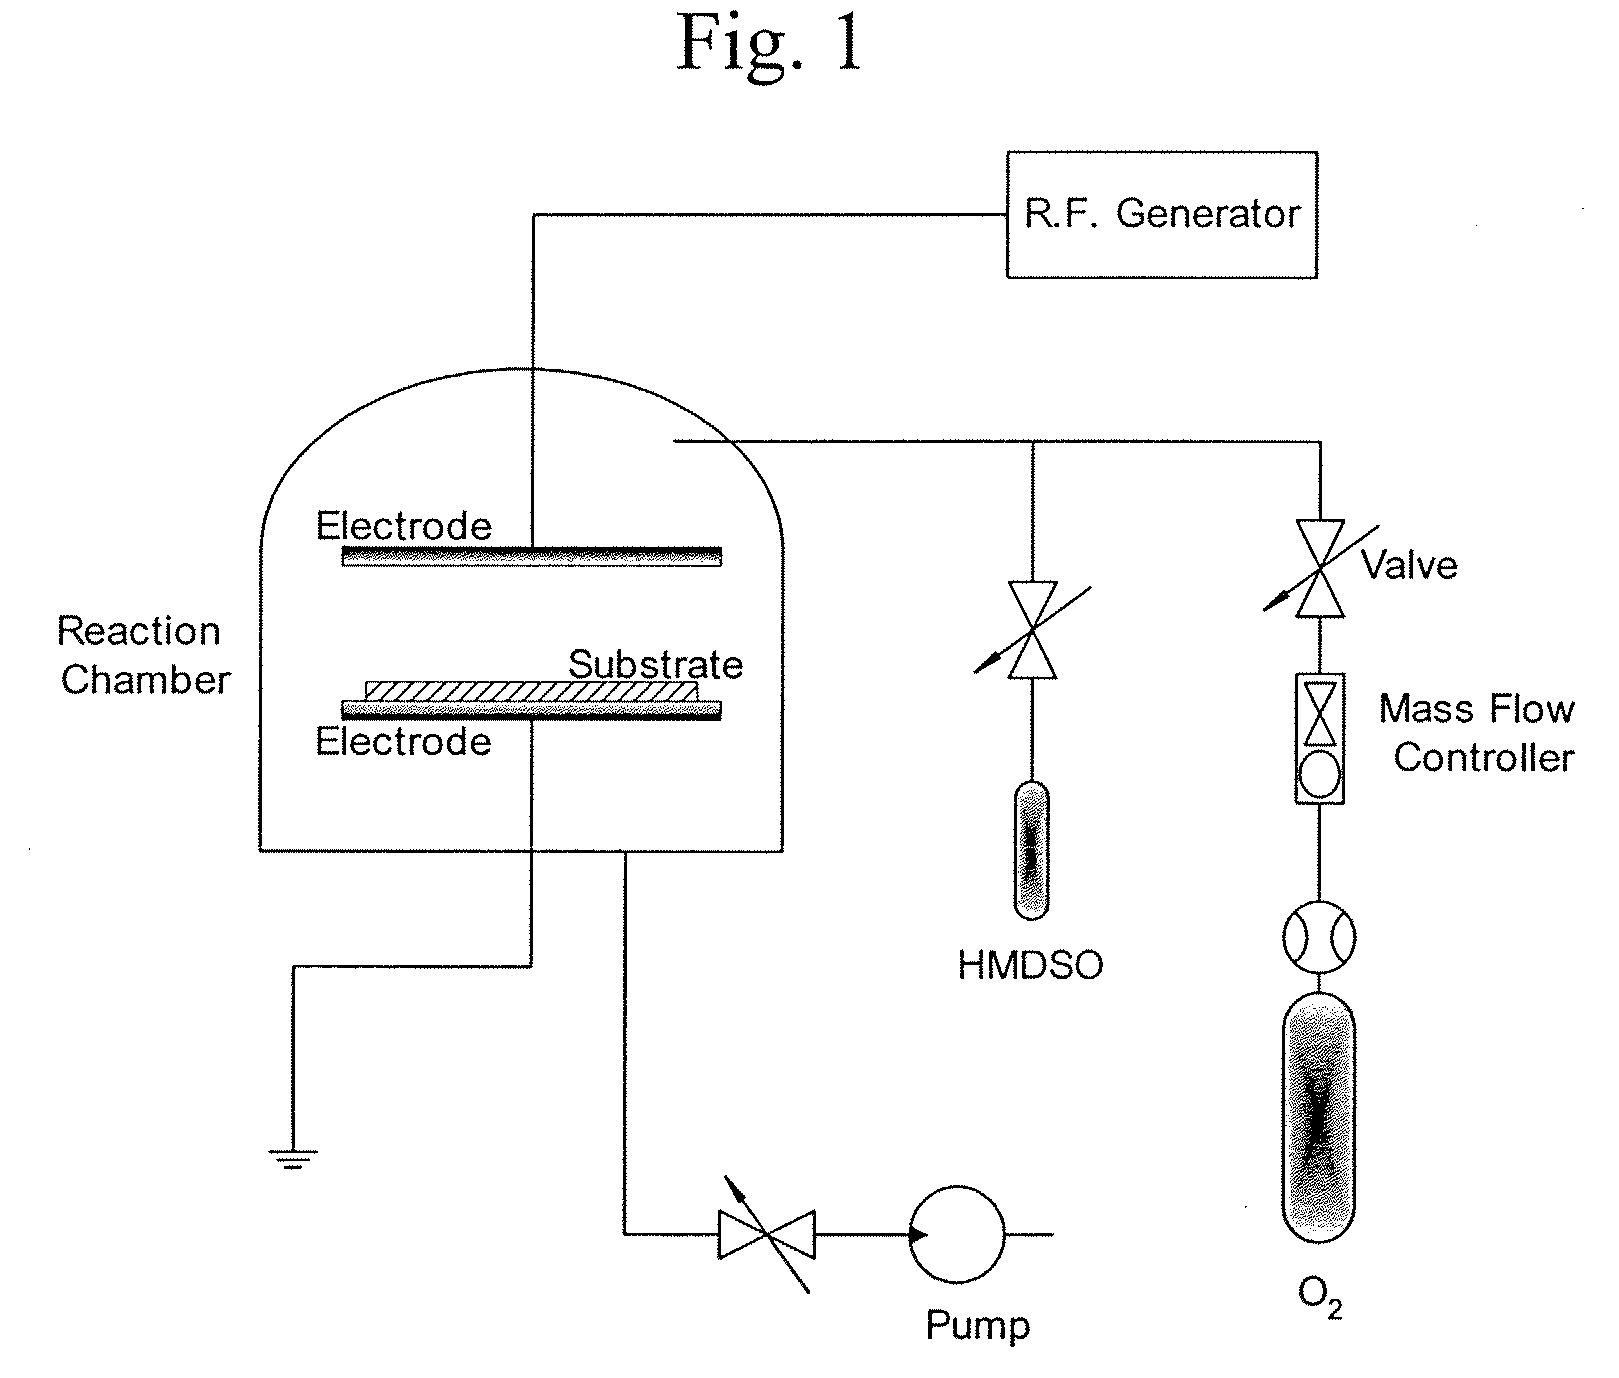 Method to manufacture composite polymer electrolyte membranes coated with inorganic thin films for fuel cells